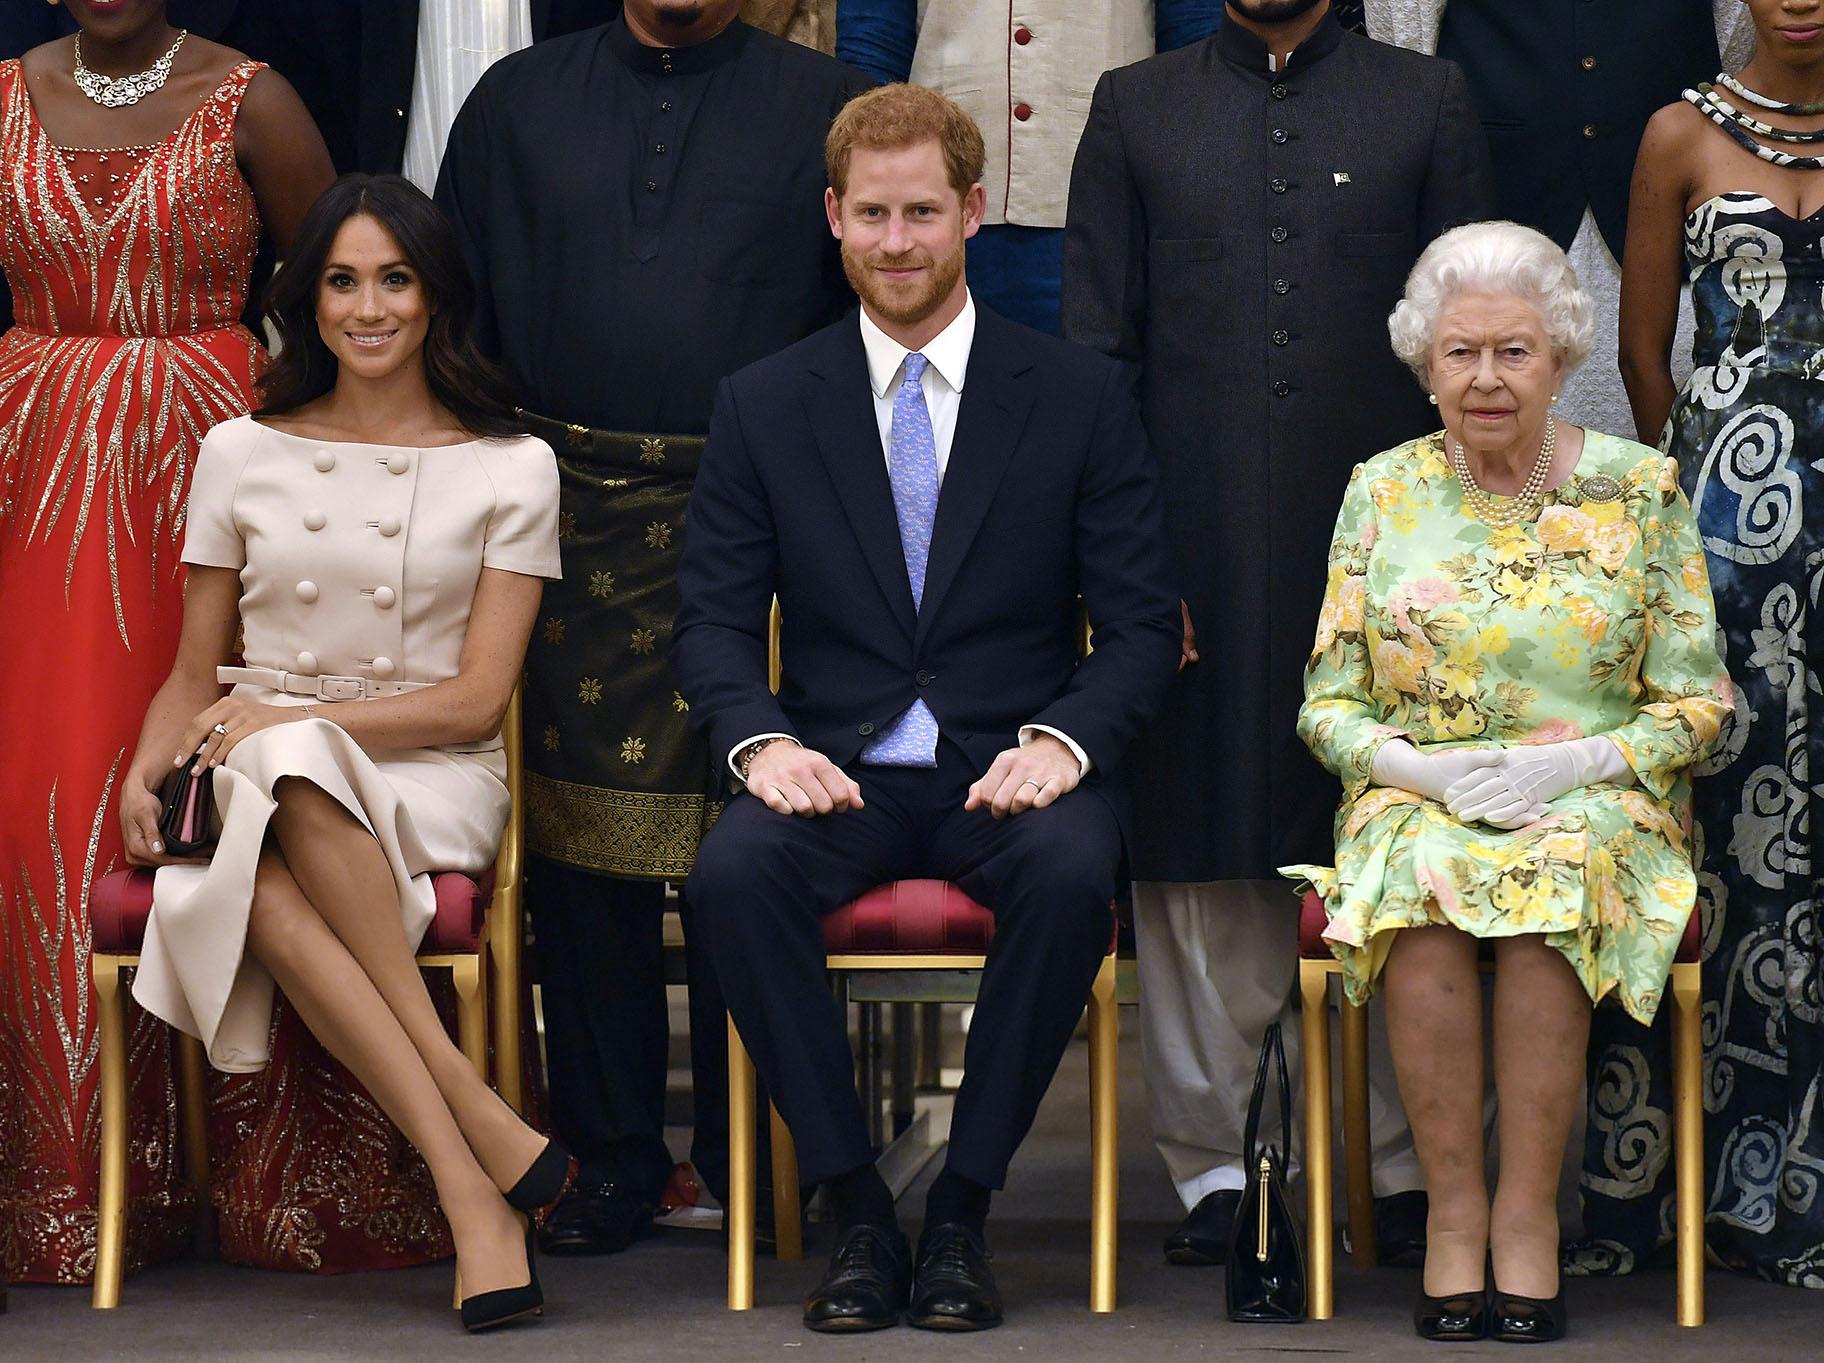 In this Tuesday, June 26, 2018 file photo, Britain’s Queen Elizabeth, Prince Harry and Meghan, Duchess of Sussex, pose for a group photo at the Queen’s Young Leaders Awards Ceremony at Buckingham Palace in London. (John Stillwell / Pool Photo via AP, File)